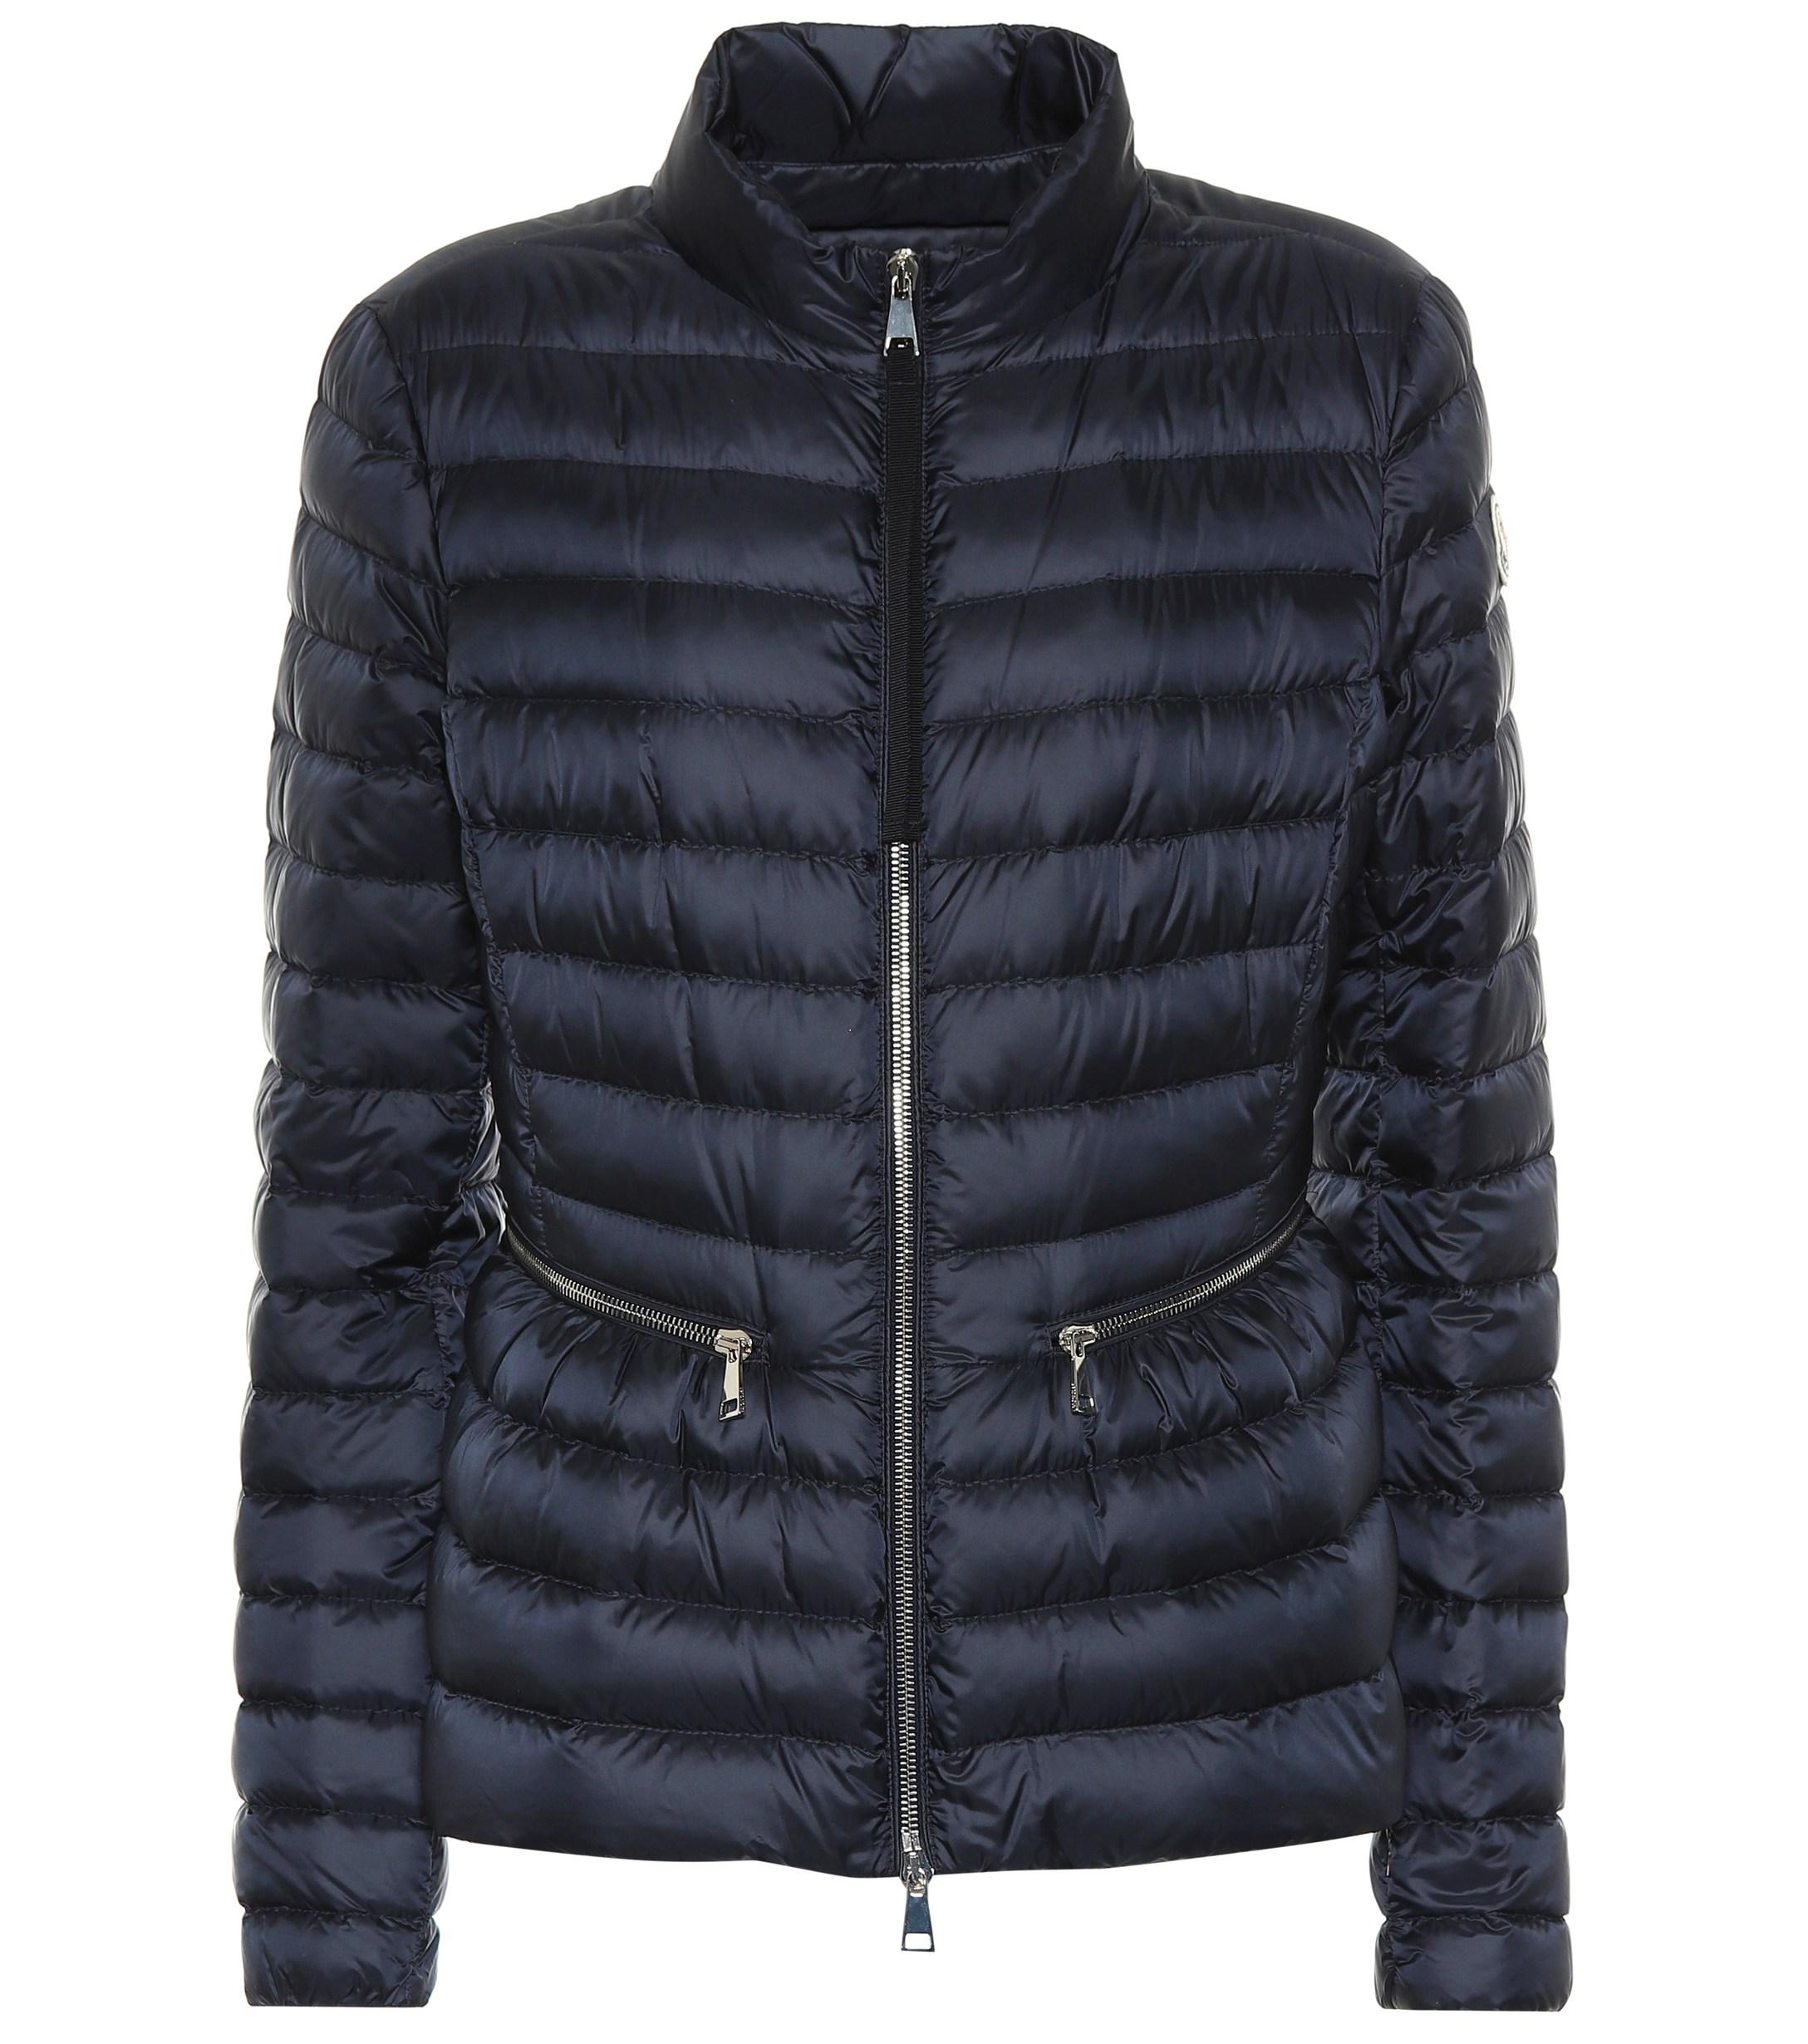 Moncler Agate Down Jacket in Black - Lyst